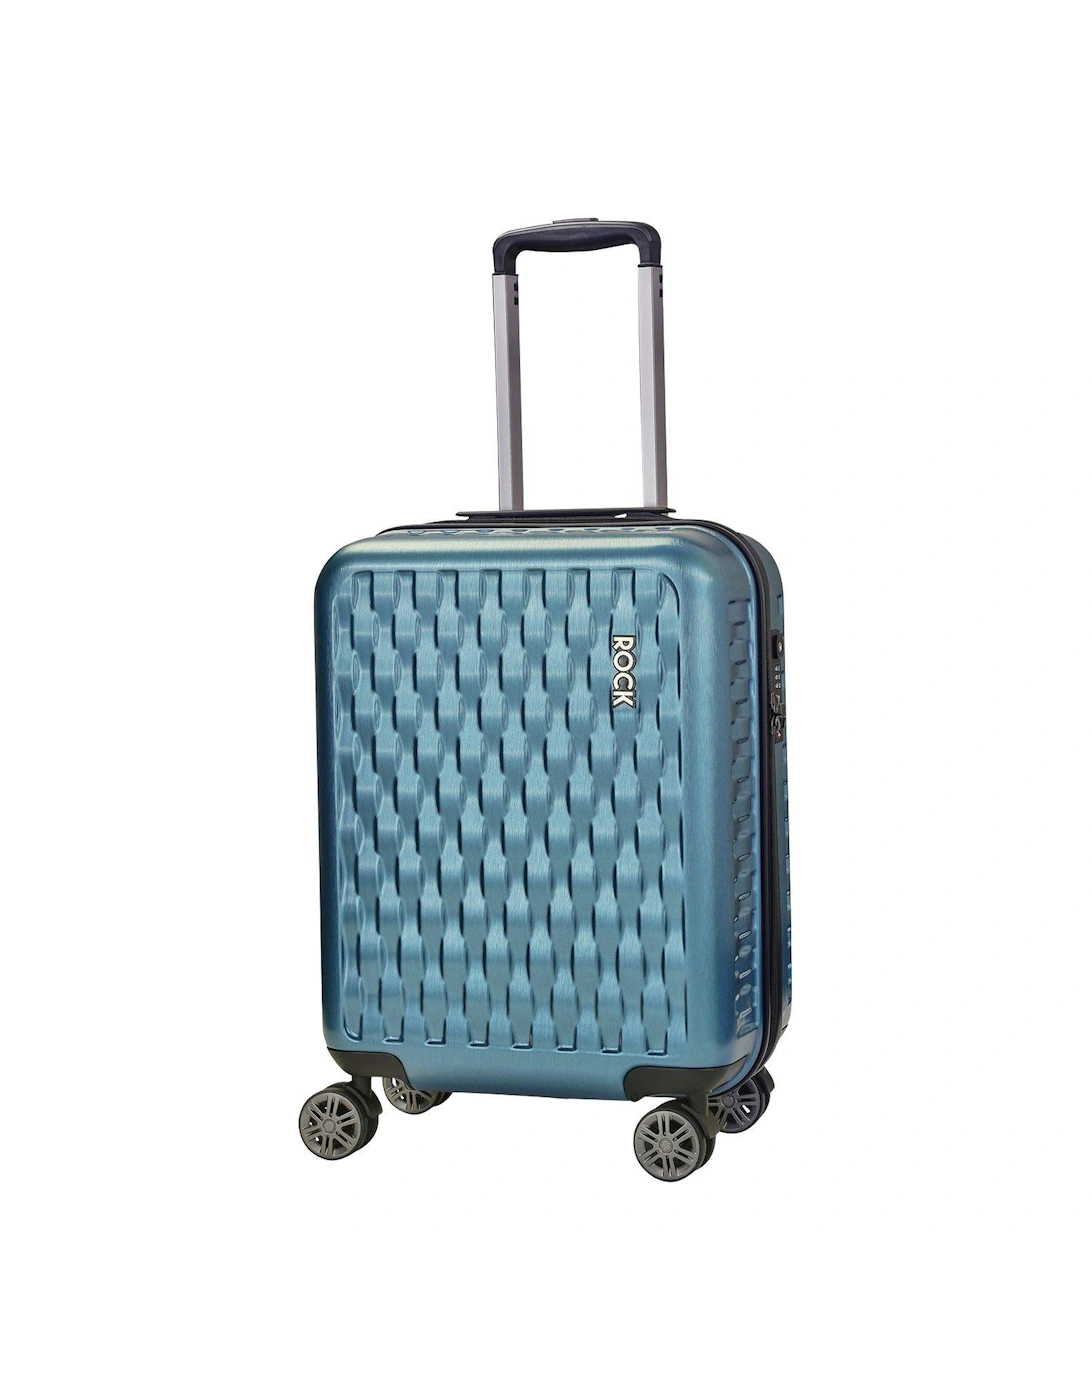 Allure Carry-on 8-Wheel Suitcase - Blue, 2 of 1